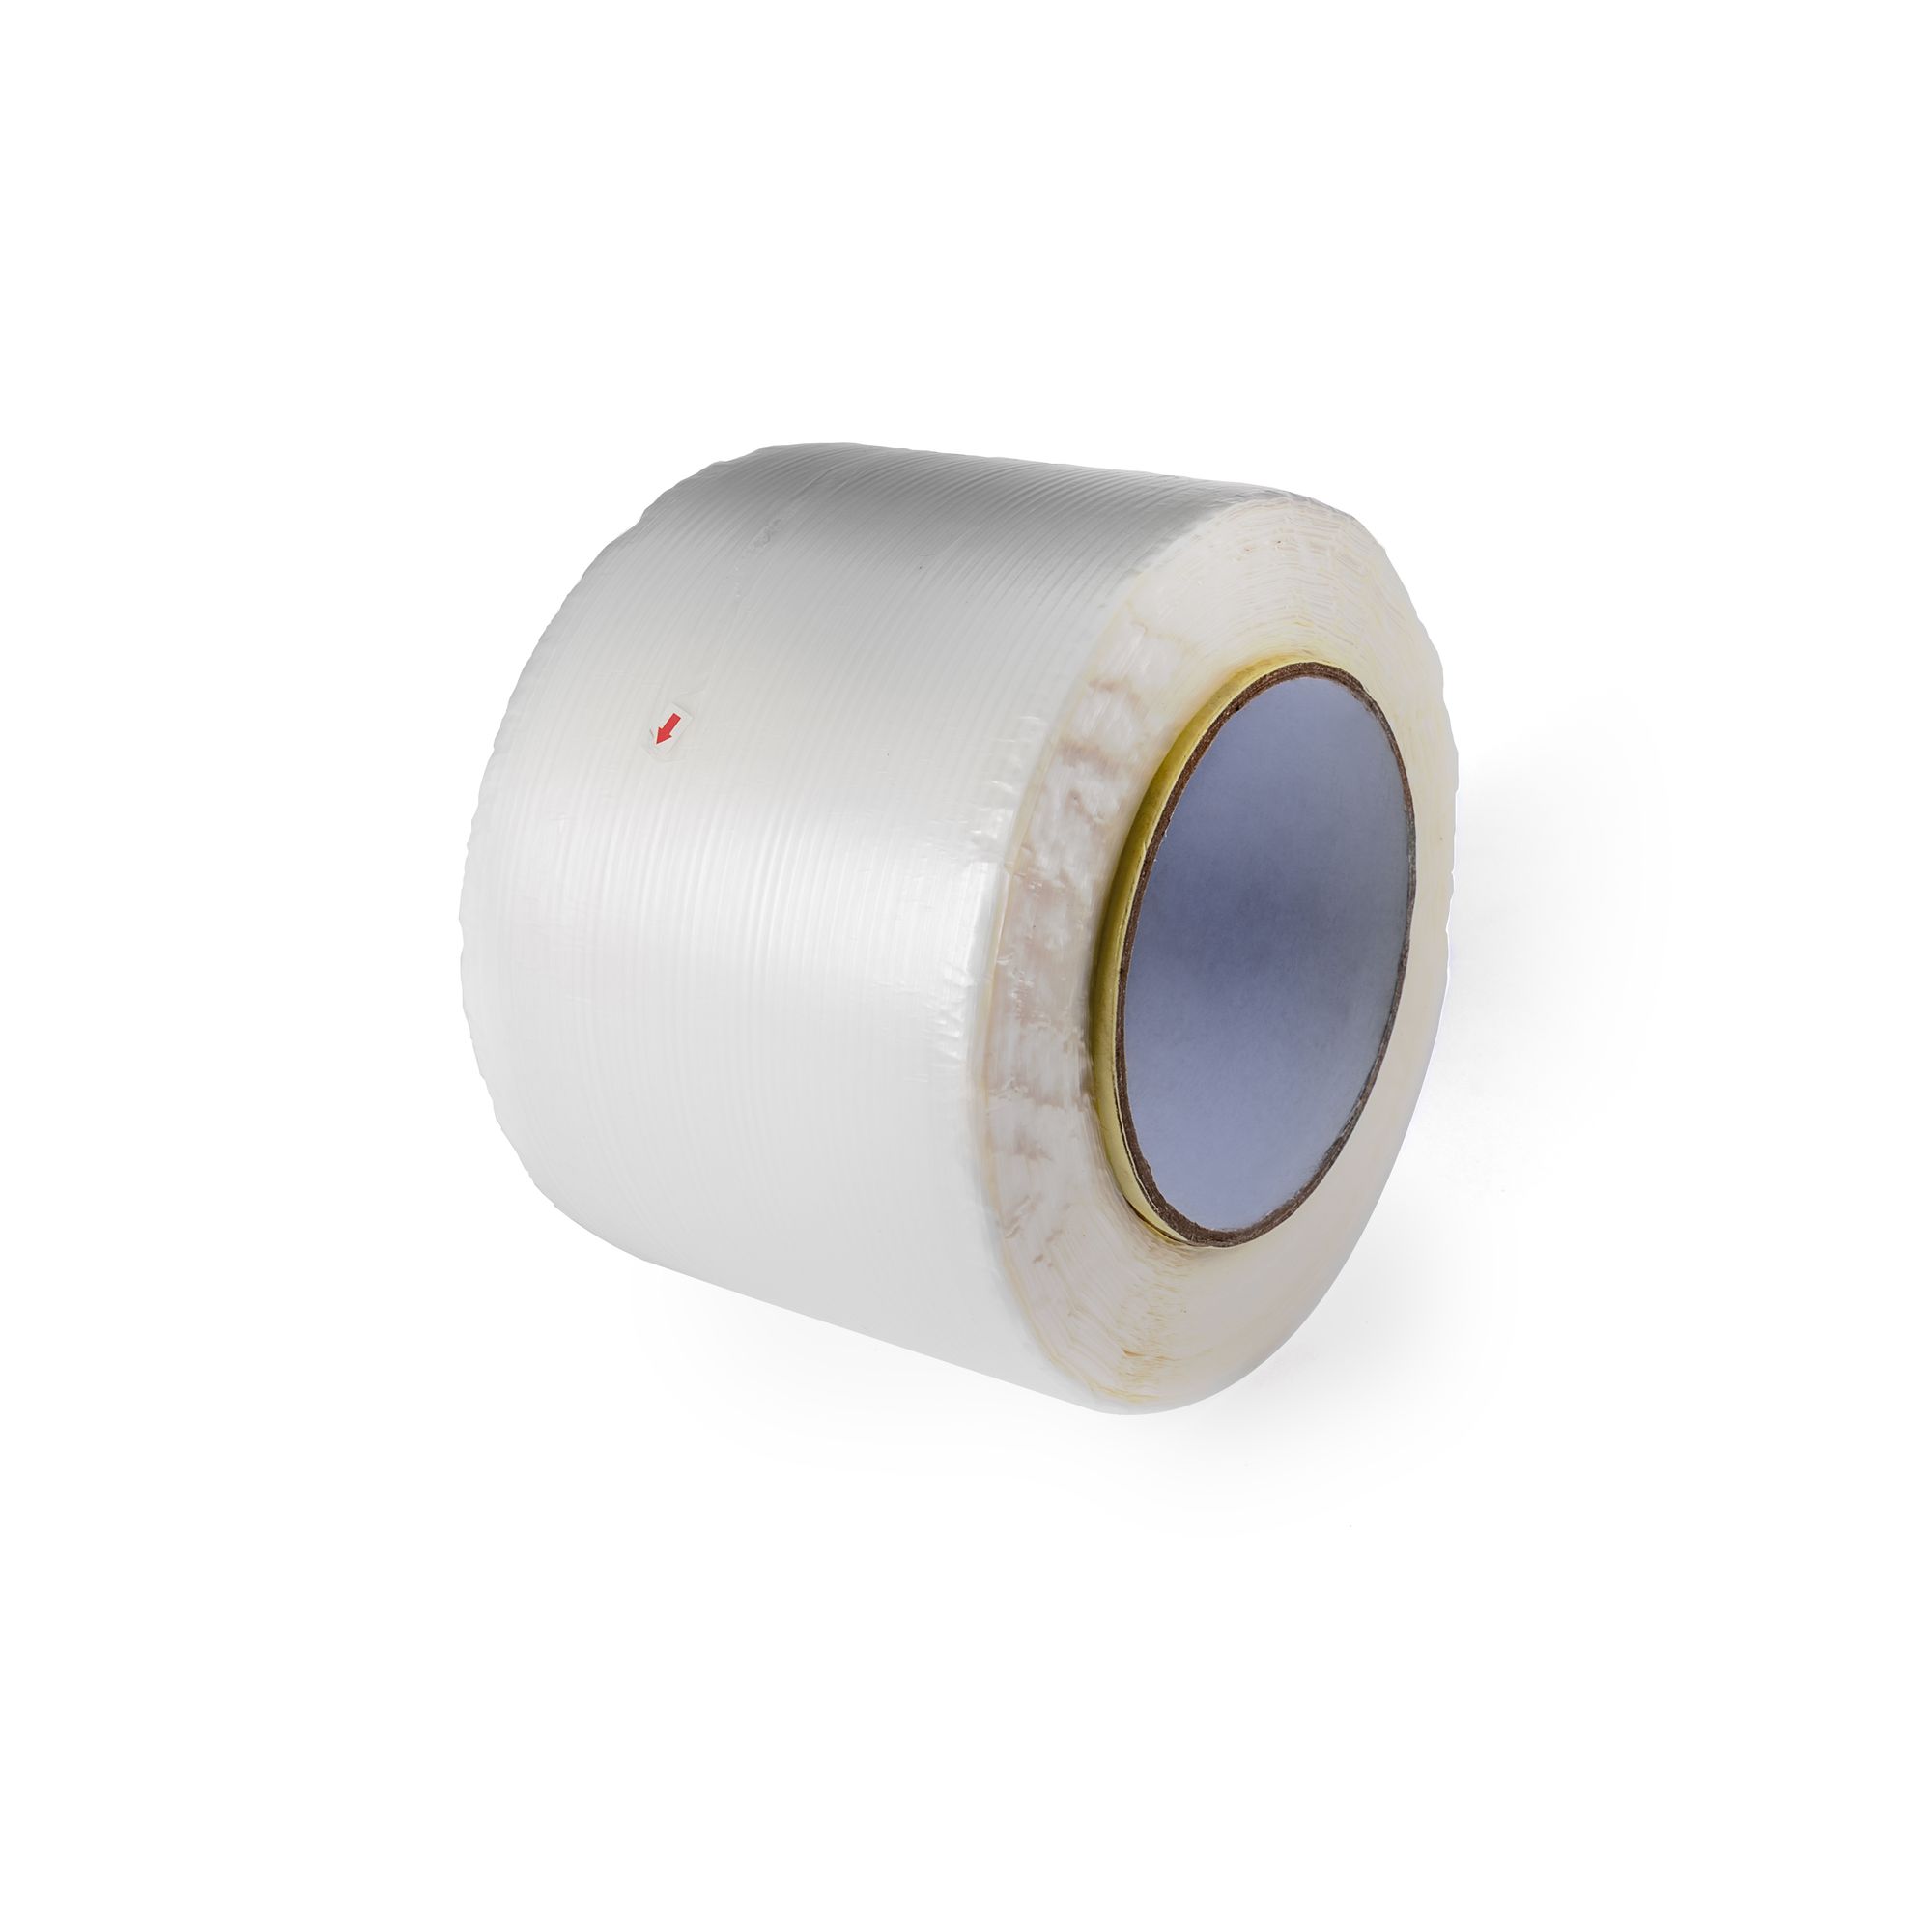 Permanent tape closures - Tamper evident - Permanent tape closures - Hotmelt adhesive - Hotmelt adhesive - The security tape company - Reseleable tape Closures - Film transfer - Silicone release liner - http://www.kbedich.com - Cintas de seguridad